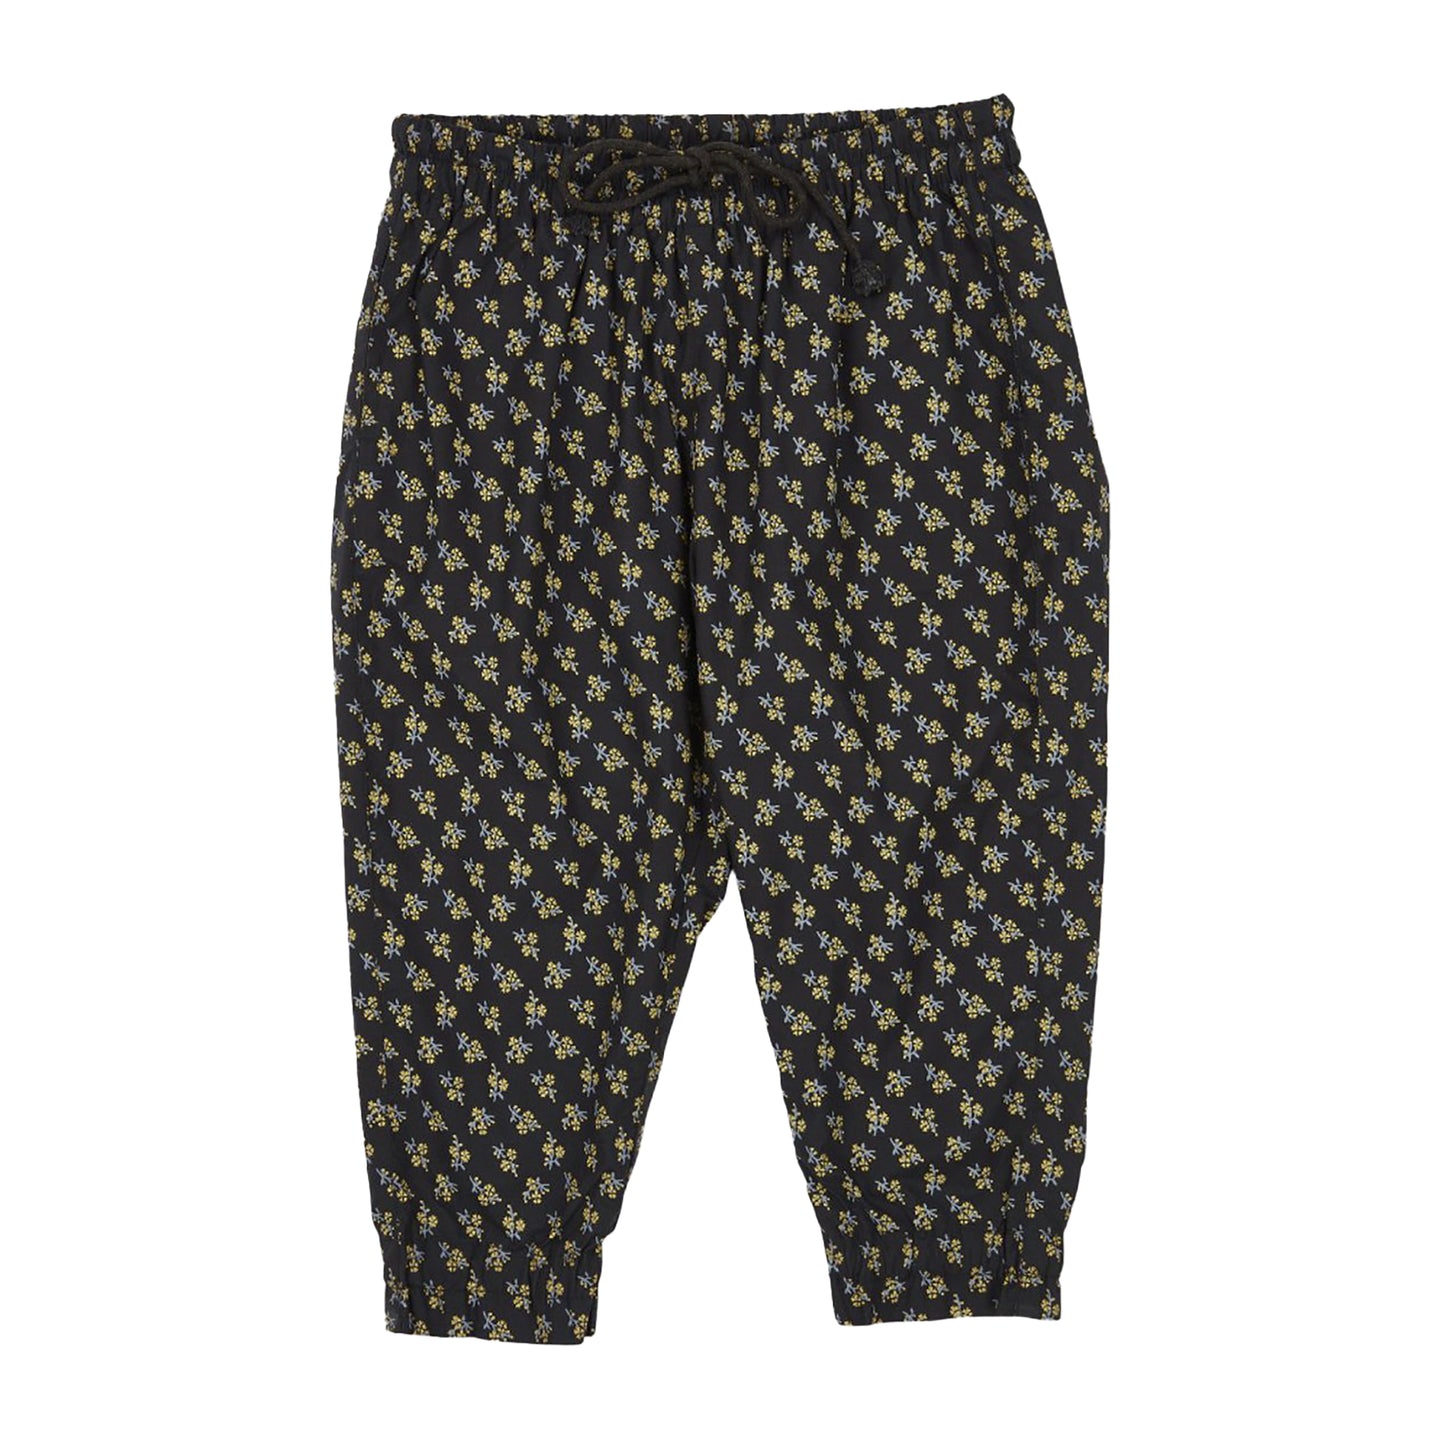 [3y] Caramel Baby & Child Woodpigeon Trousers in Black/Yellow Small Floral Print